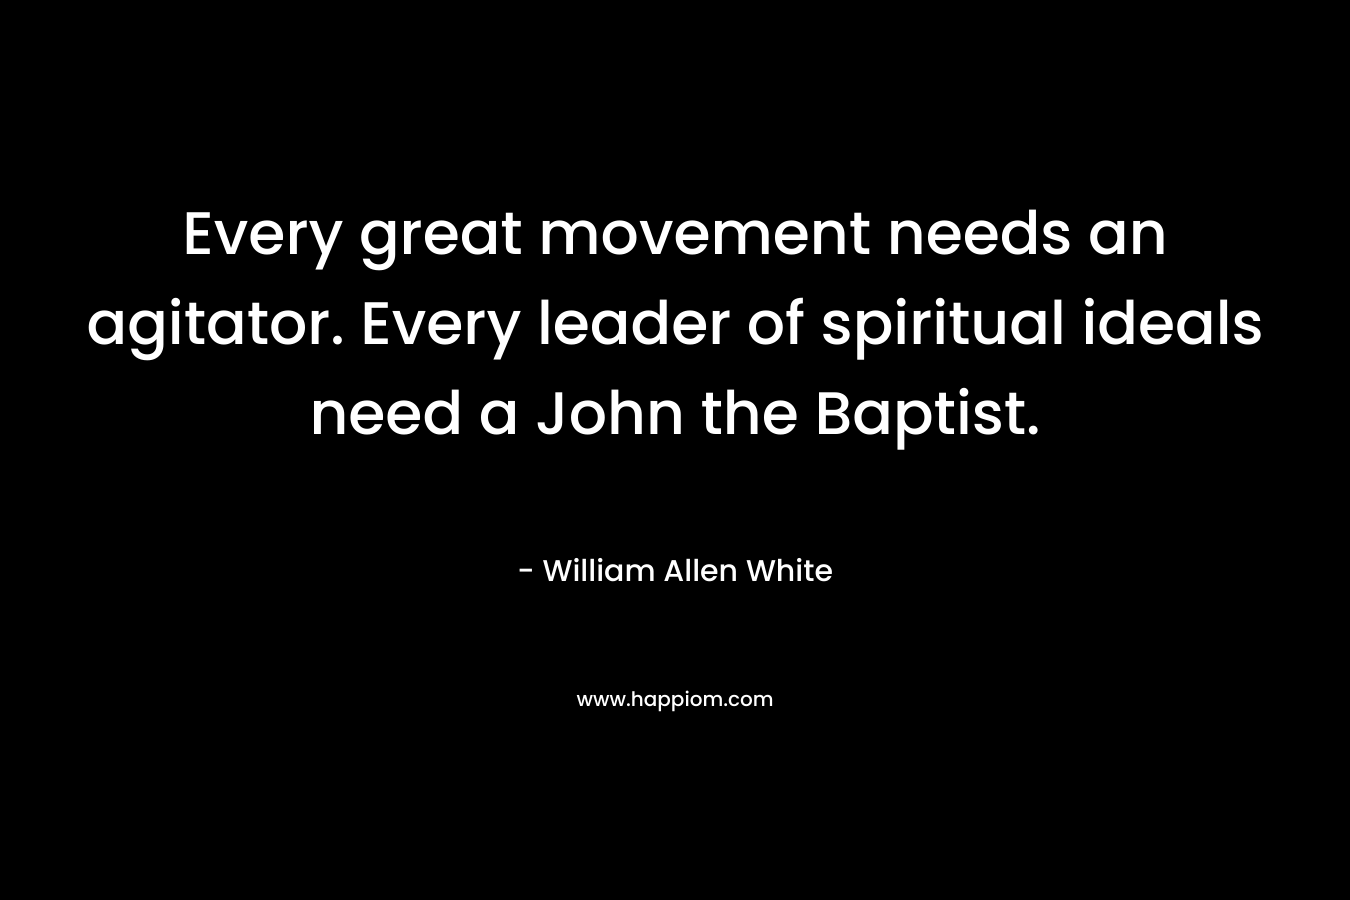 Every great movement needs an agitator. Every leader of spiritual ideals need a John the Baptist. – William Allen White